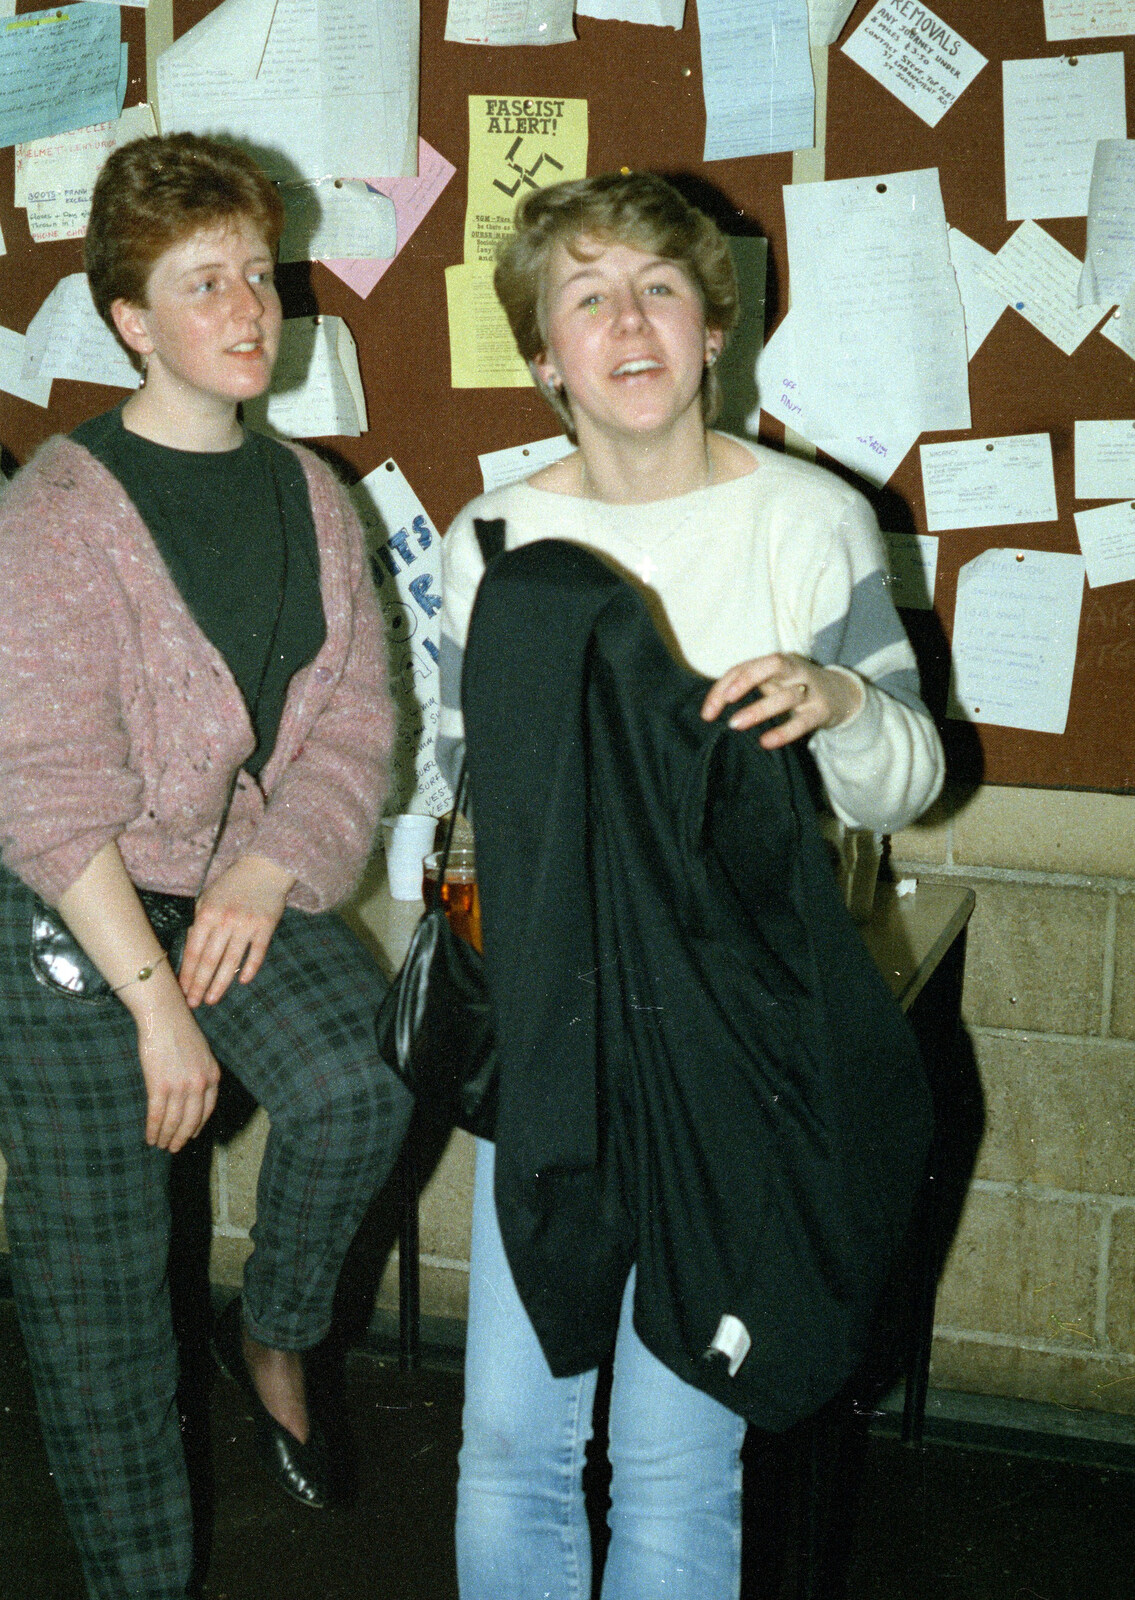 One of Barbara's psychology coursemates from Uni: First Weeks At Polytechnic, Umbrellas and a Visit From Liz, Plymouth - 26th September 1985